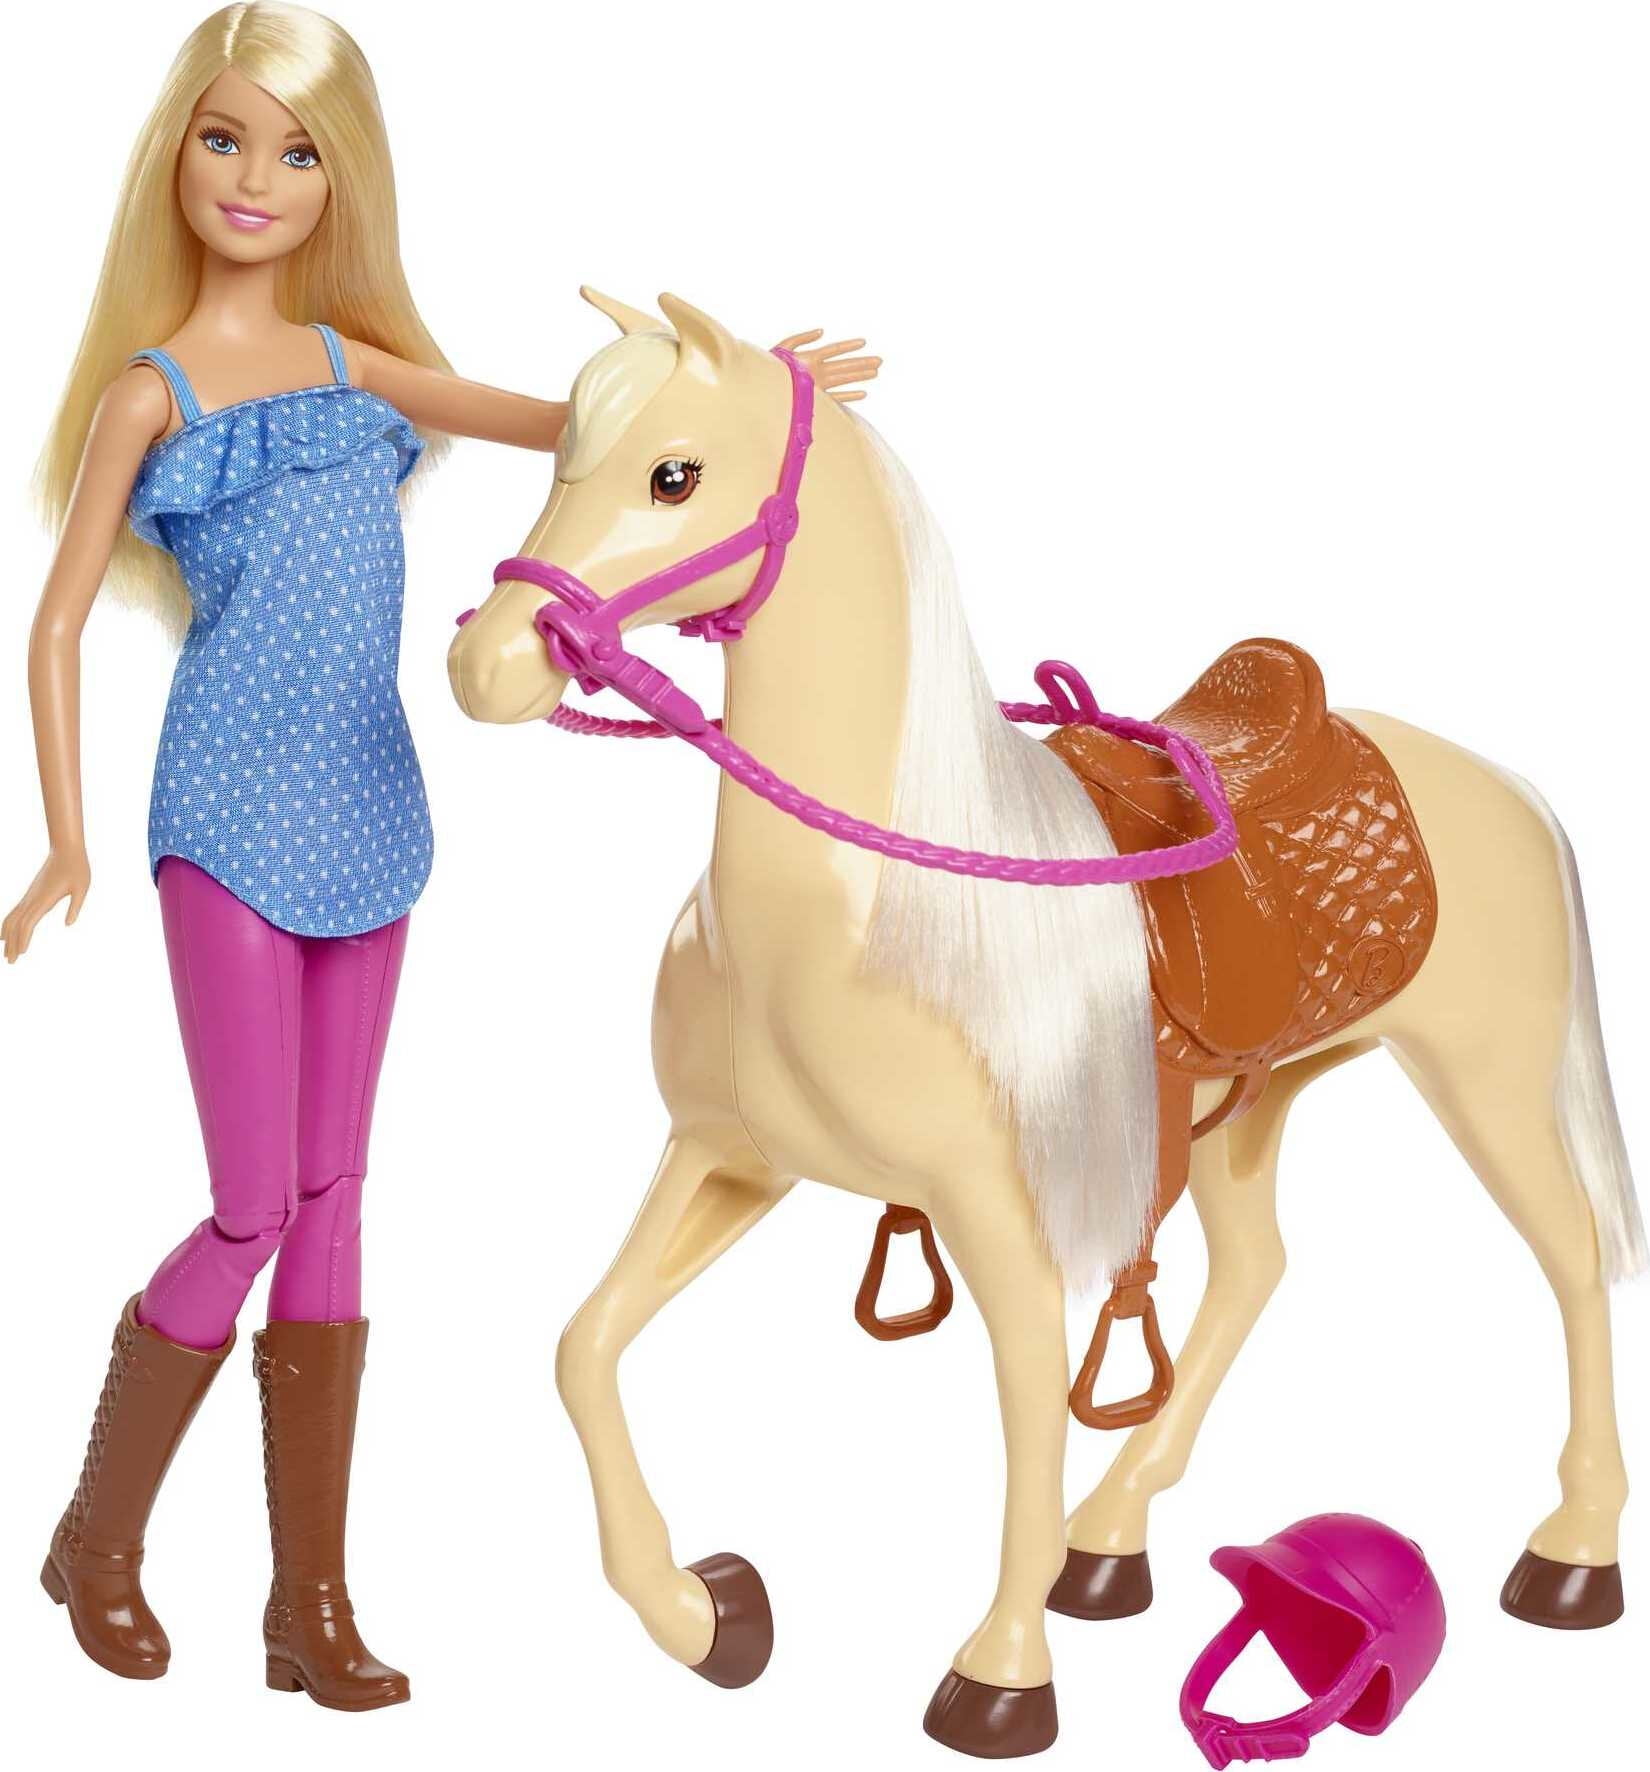 Barbie Doll & Horse Set with Blonde Doll in Riding Outfit, Light Brown Horse, Bridle & Reins - Walmart.com